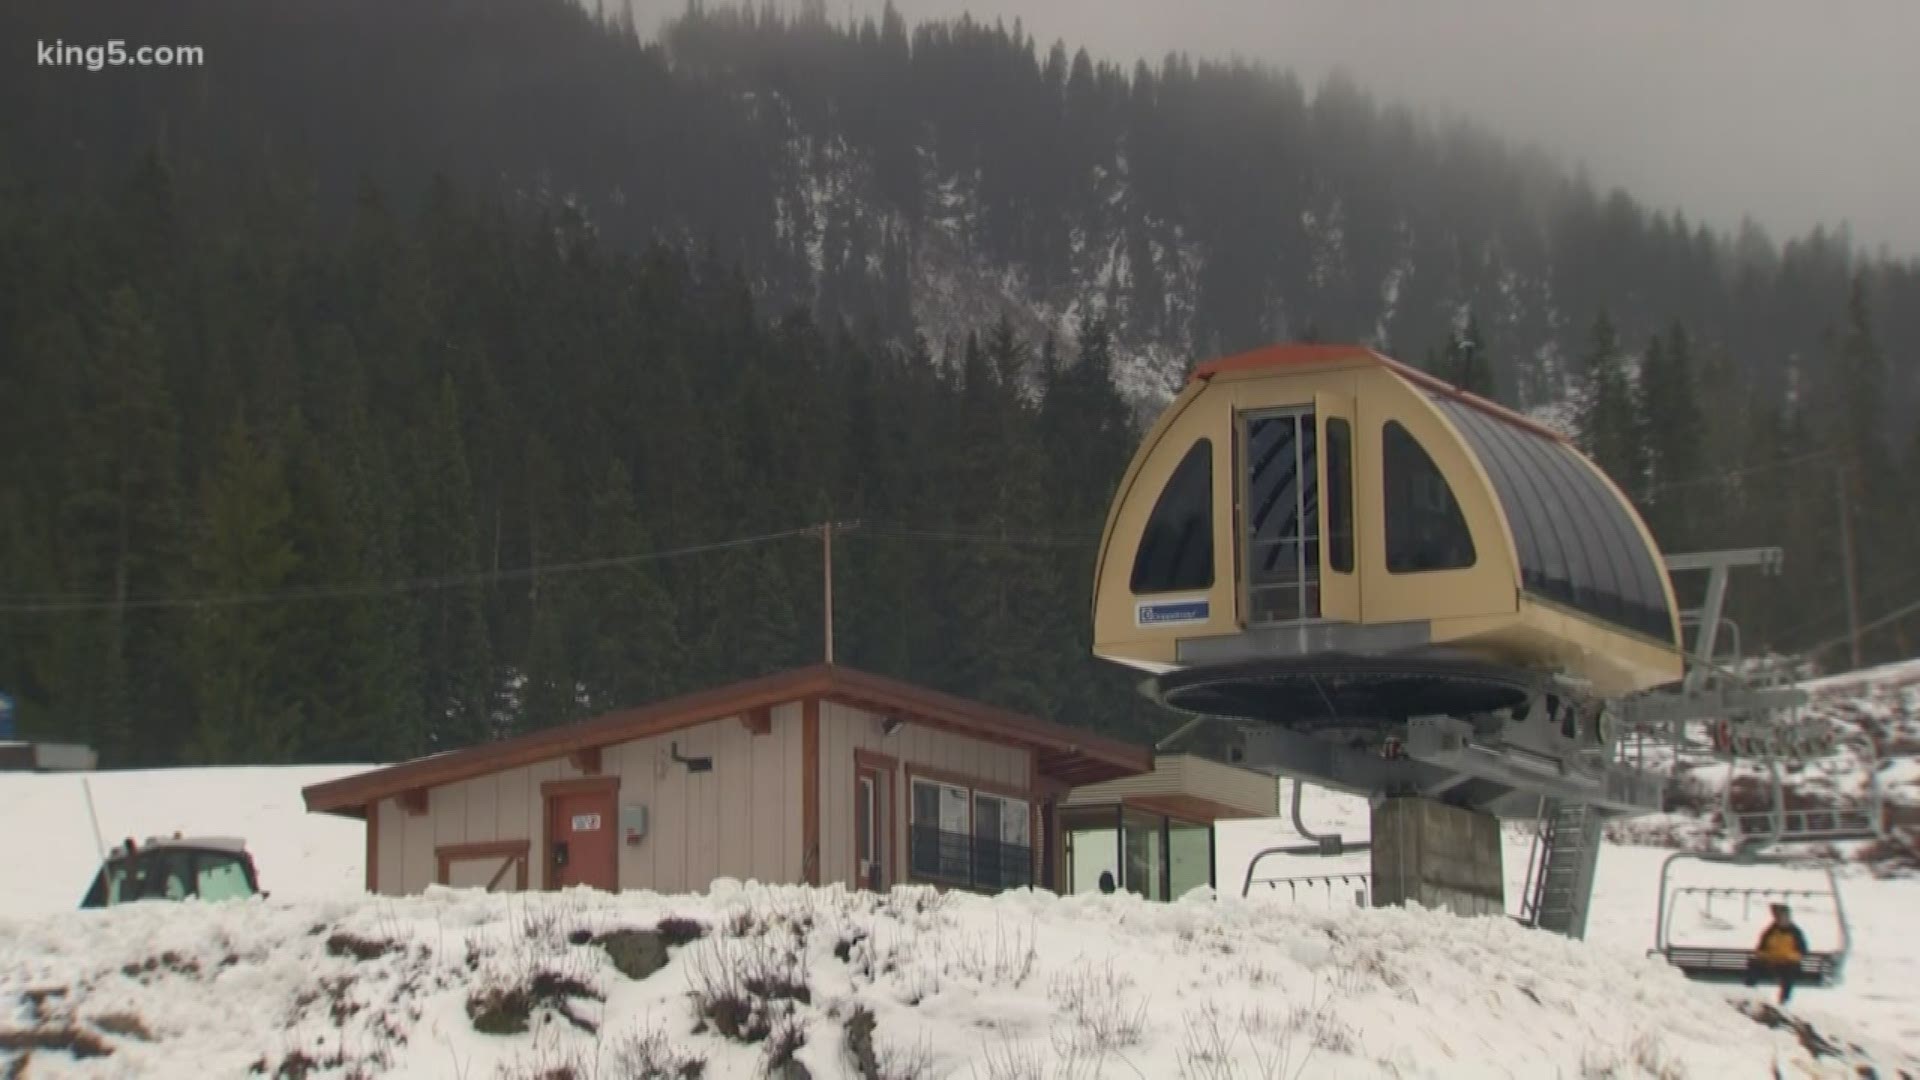 Workers at Stevens Pass are getting excited for skiers to use their two new lifts this season once a little more snow falls on the mountain.